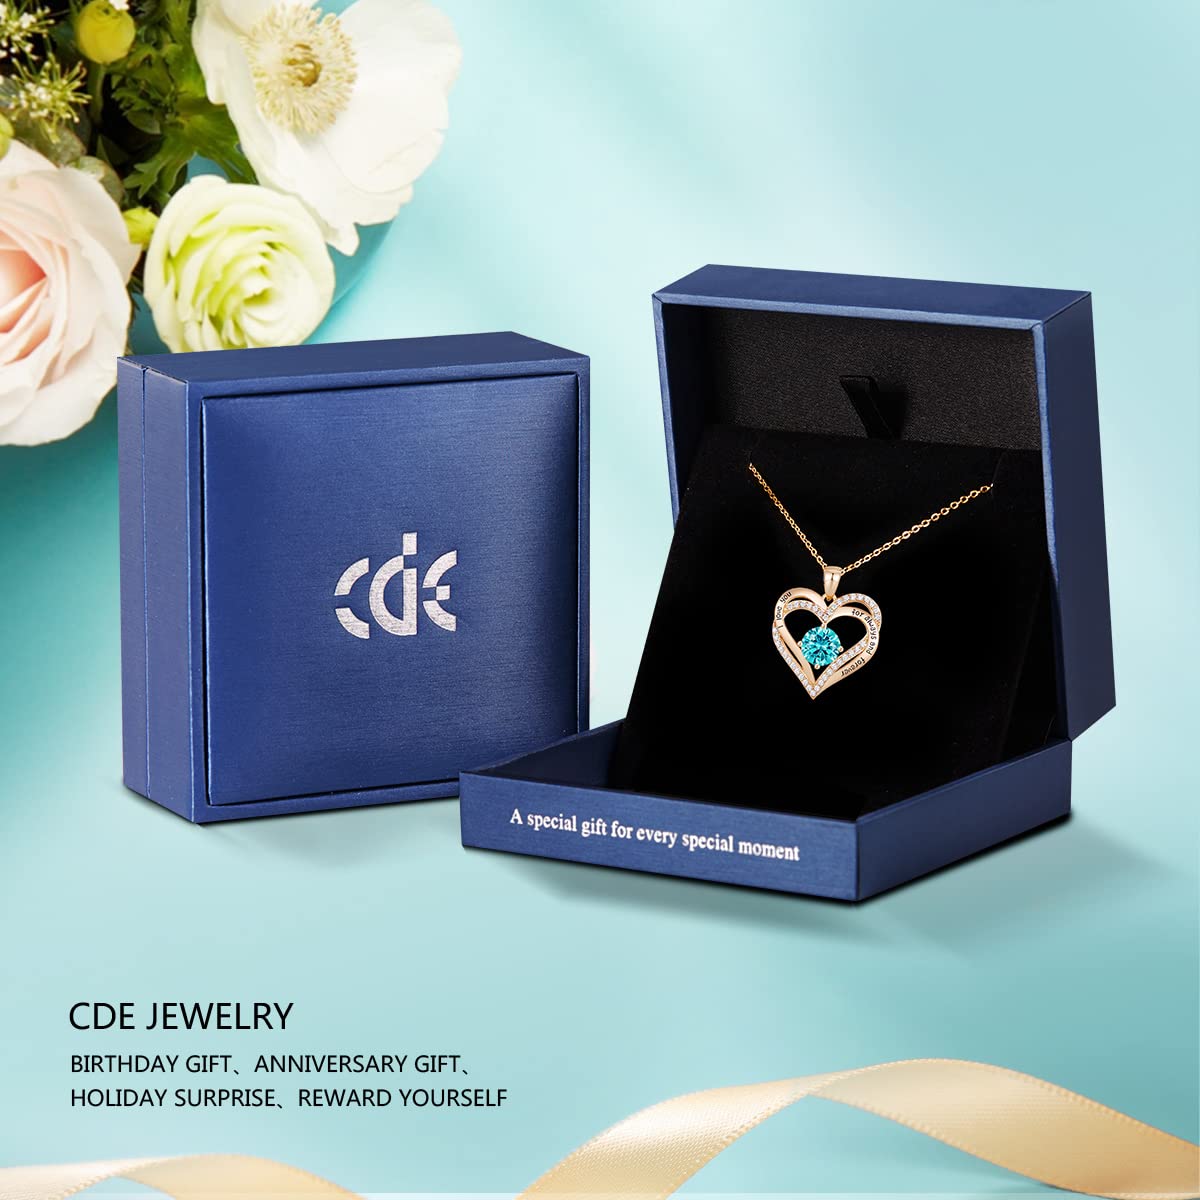 CDE Forever Love Heart Pendant Necklaces for Women 925 Sterling Silver with Birthstone Zirconia, Anniversary Birthday Gifts for Wife, Jewelry Gift for Women Mom Girlfriend Girls Her